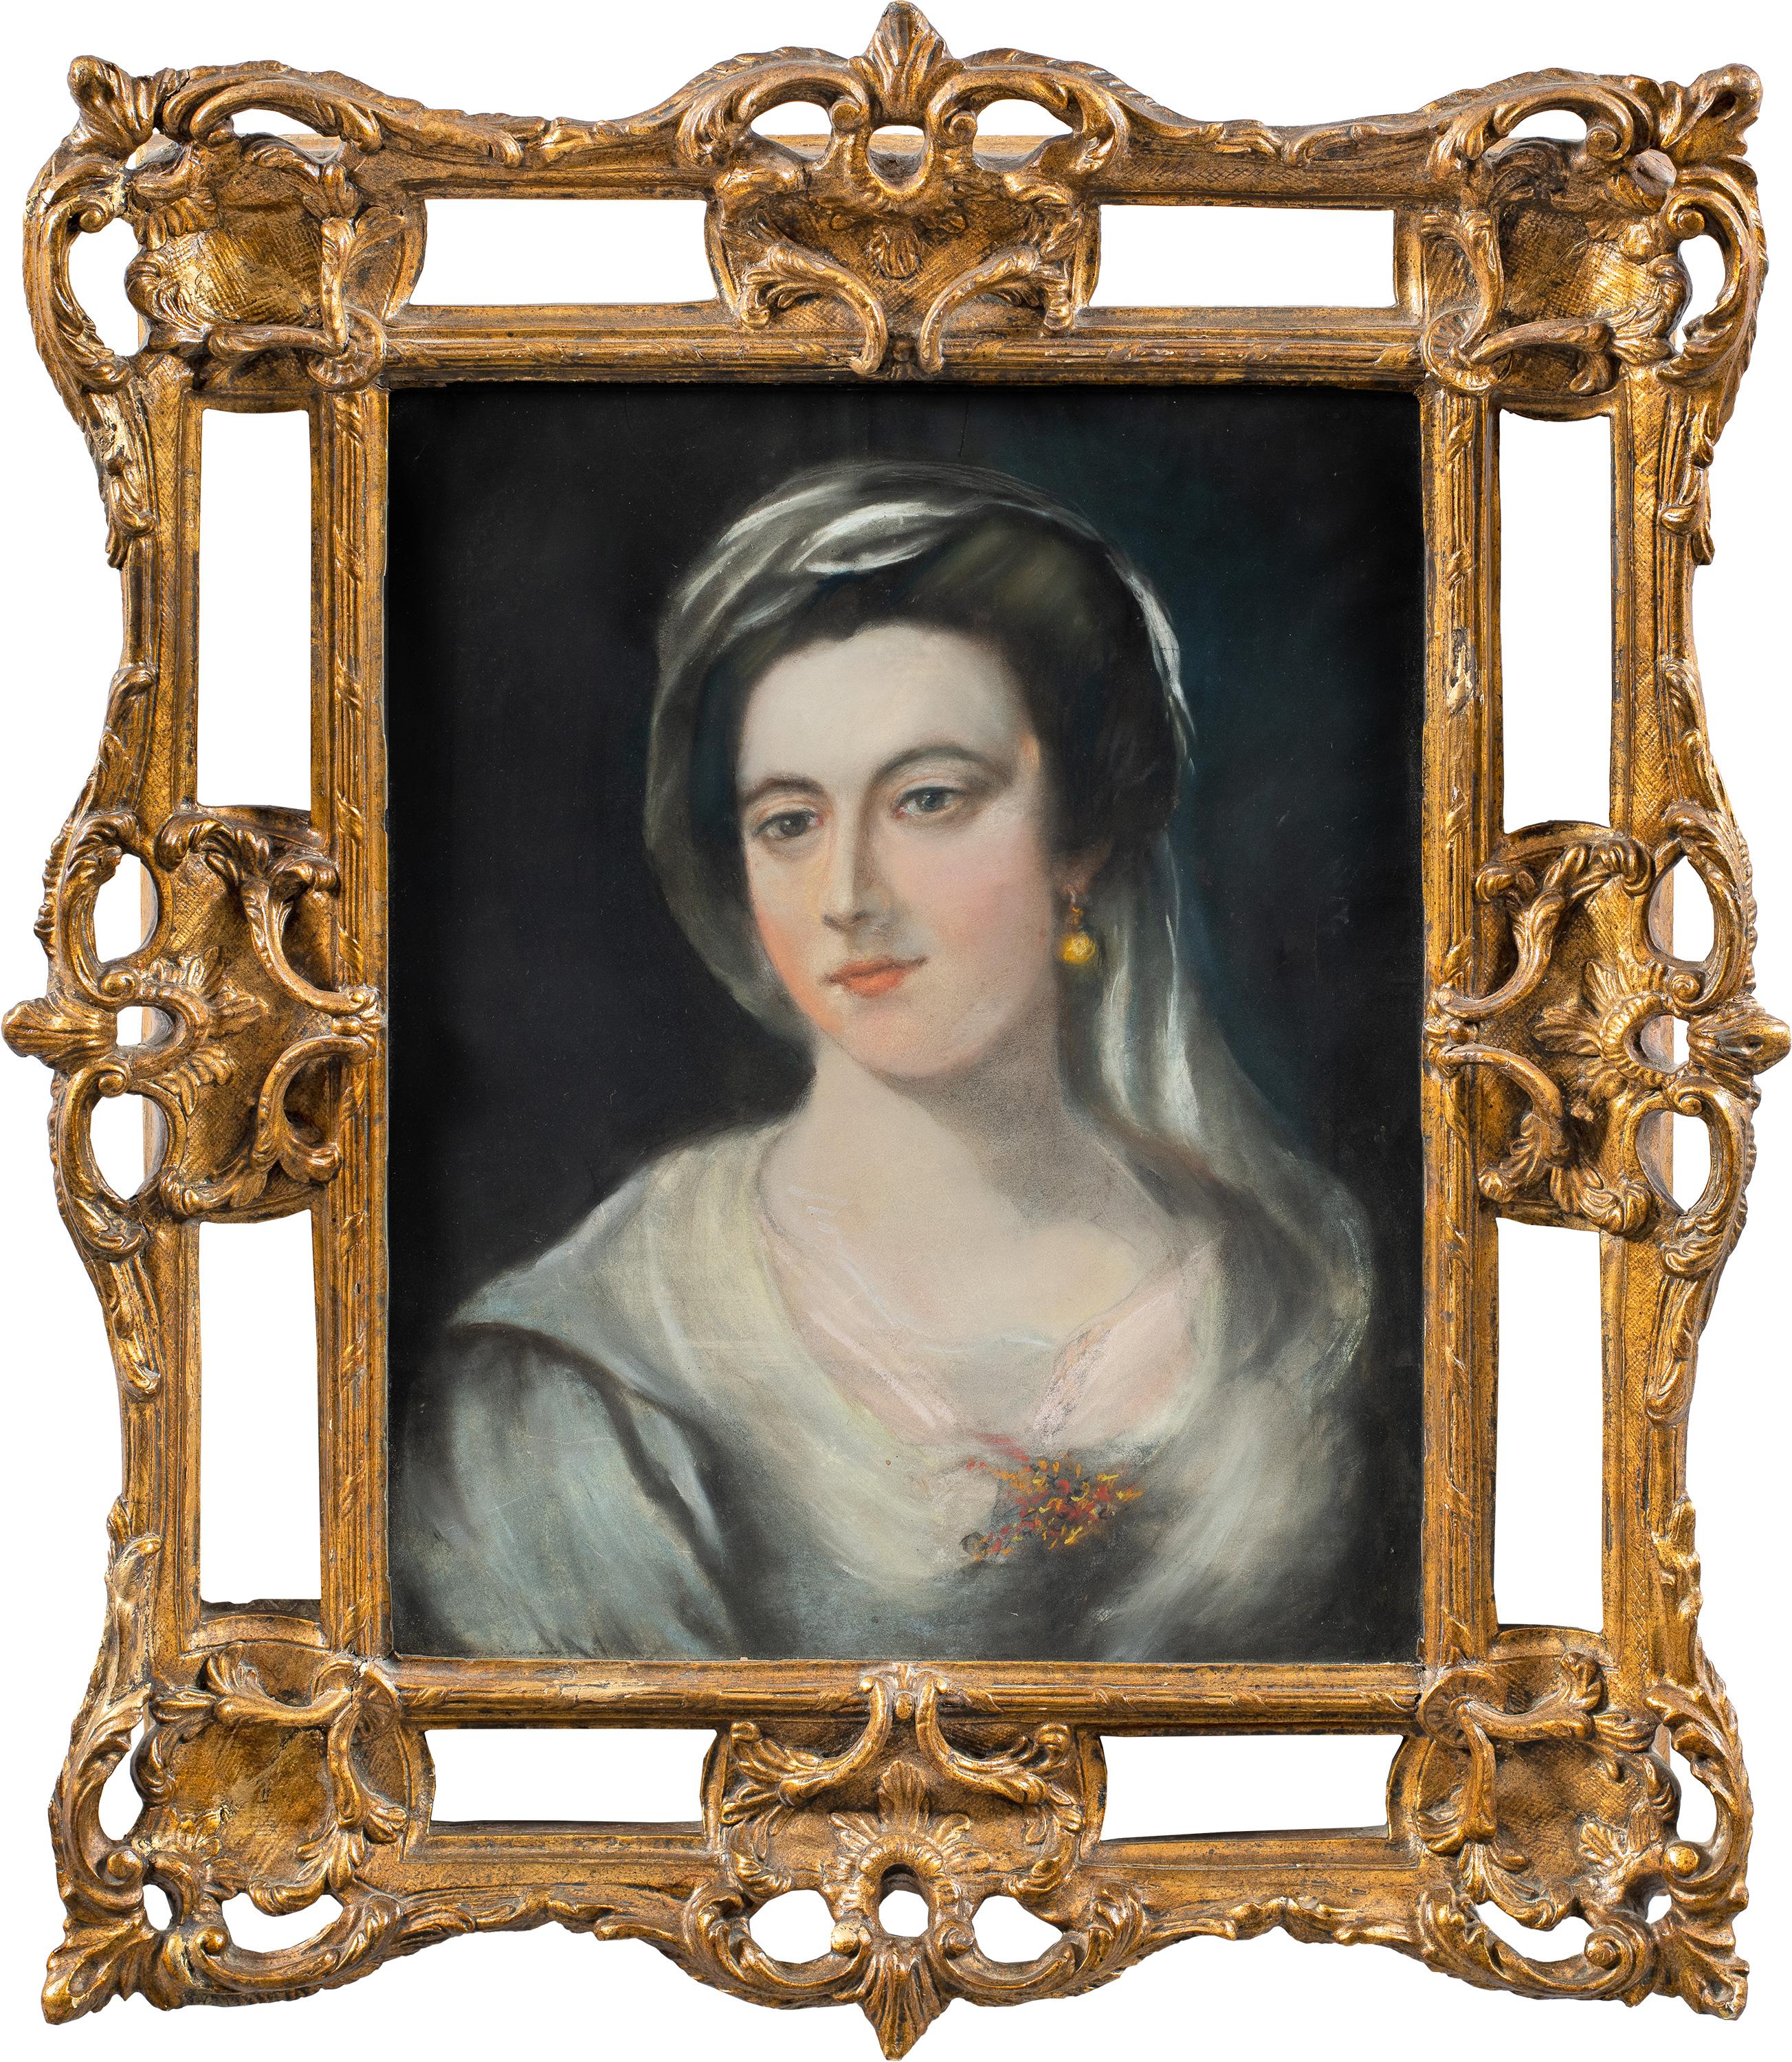 Follower of Rosalba Carriera (Venice 1673 - there 1757) - Portrait of a lady.

51 x 42 cm without frame, 79 x 67 cm with frame.

Antique pastel painting on paper, in a carved, perforated and gilded wooden frame.

Condition report: Good state of